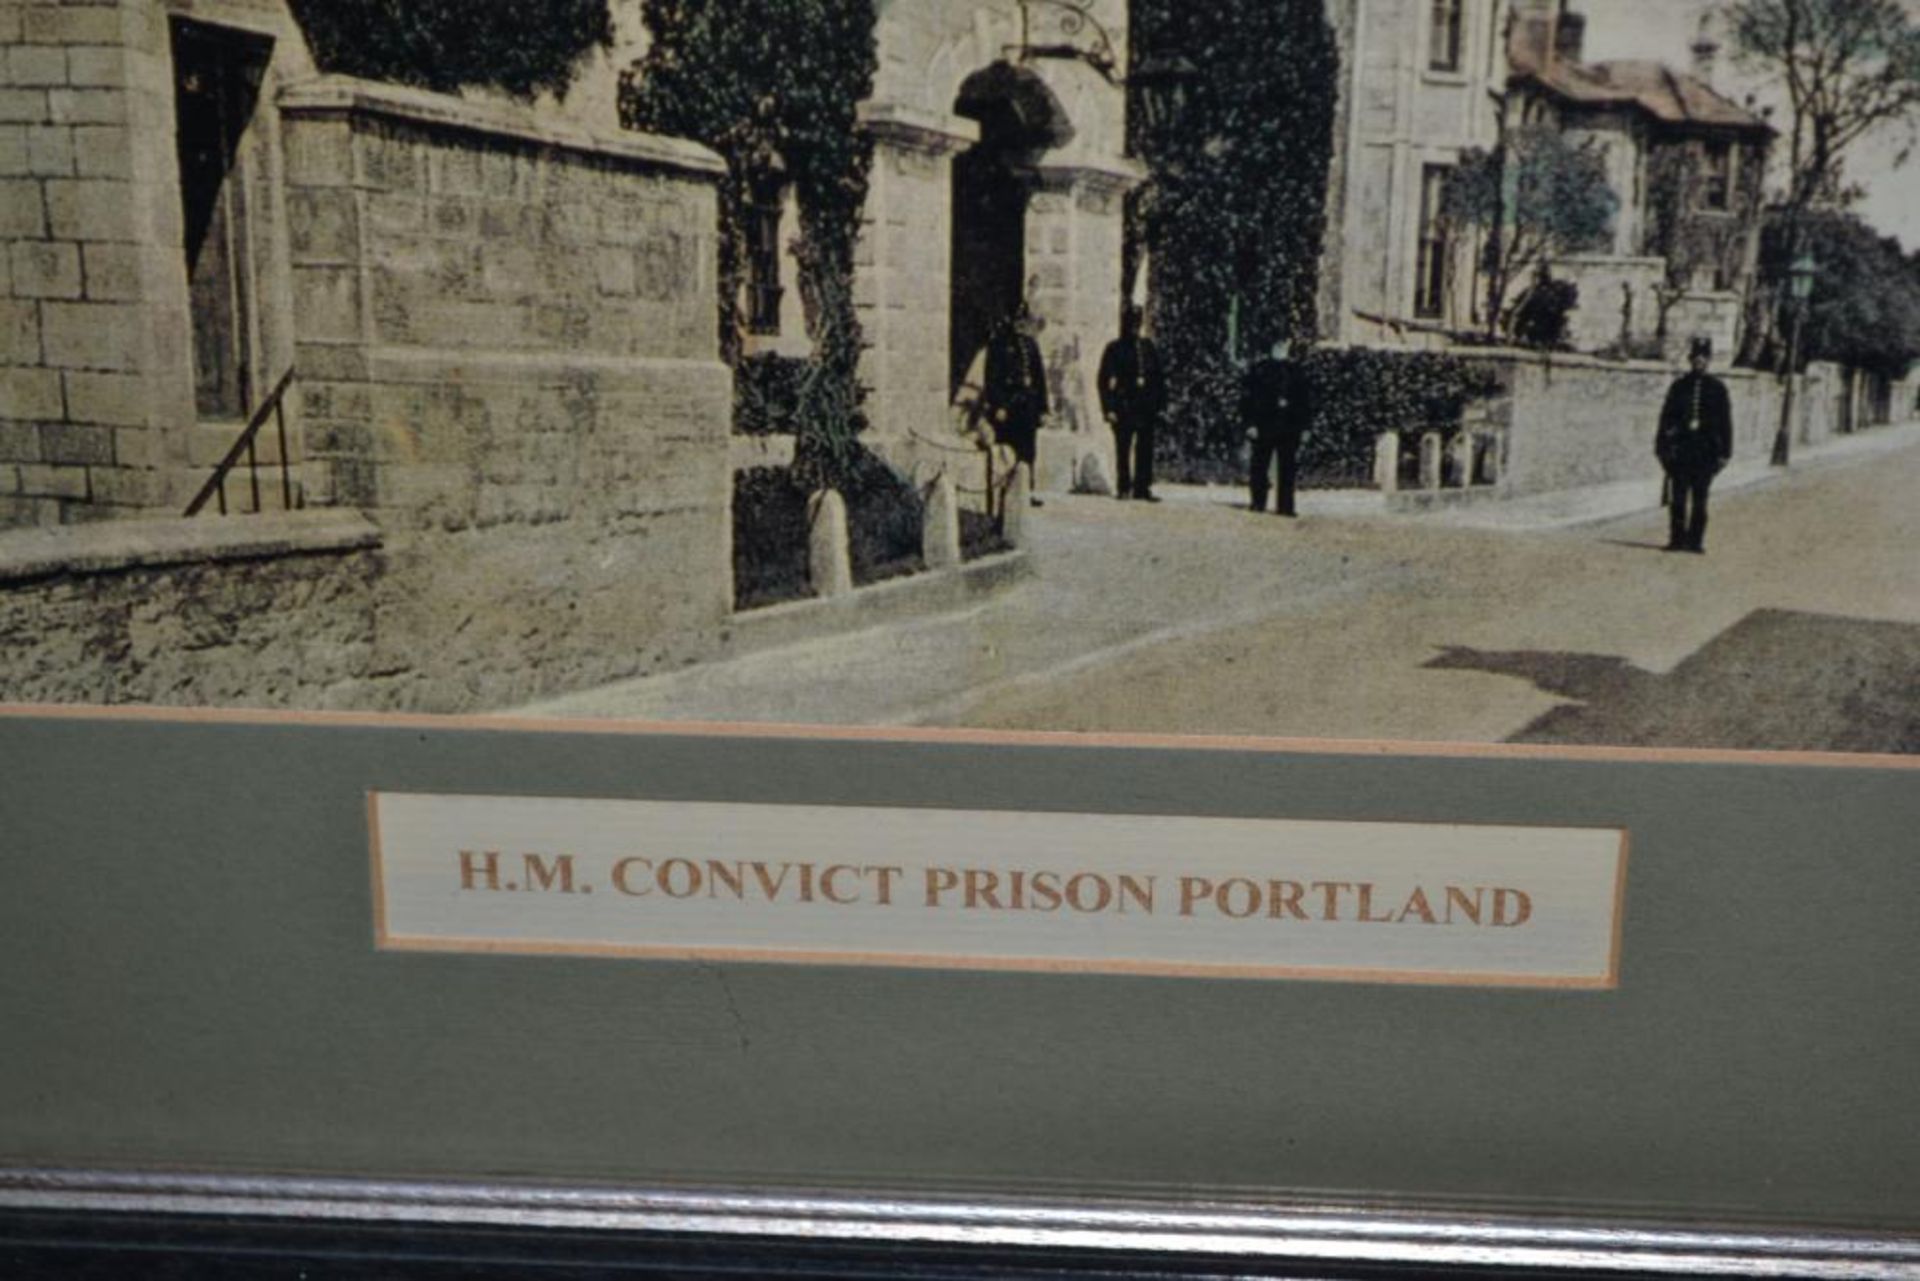 1 x Framed Picture of H.M. Convict Prison Portland - 44 x 34 cms - Ref BB679 GF - CL351 - Location: - Image 3 of 3